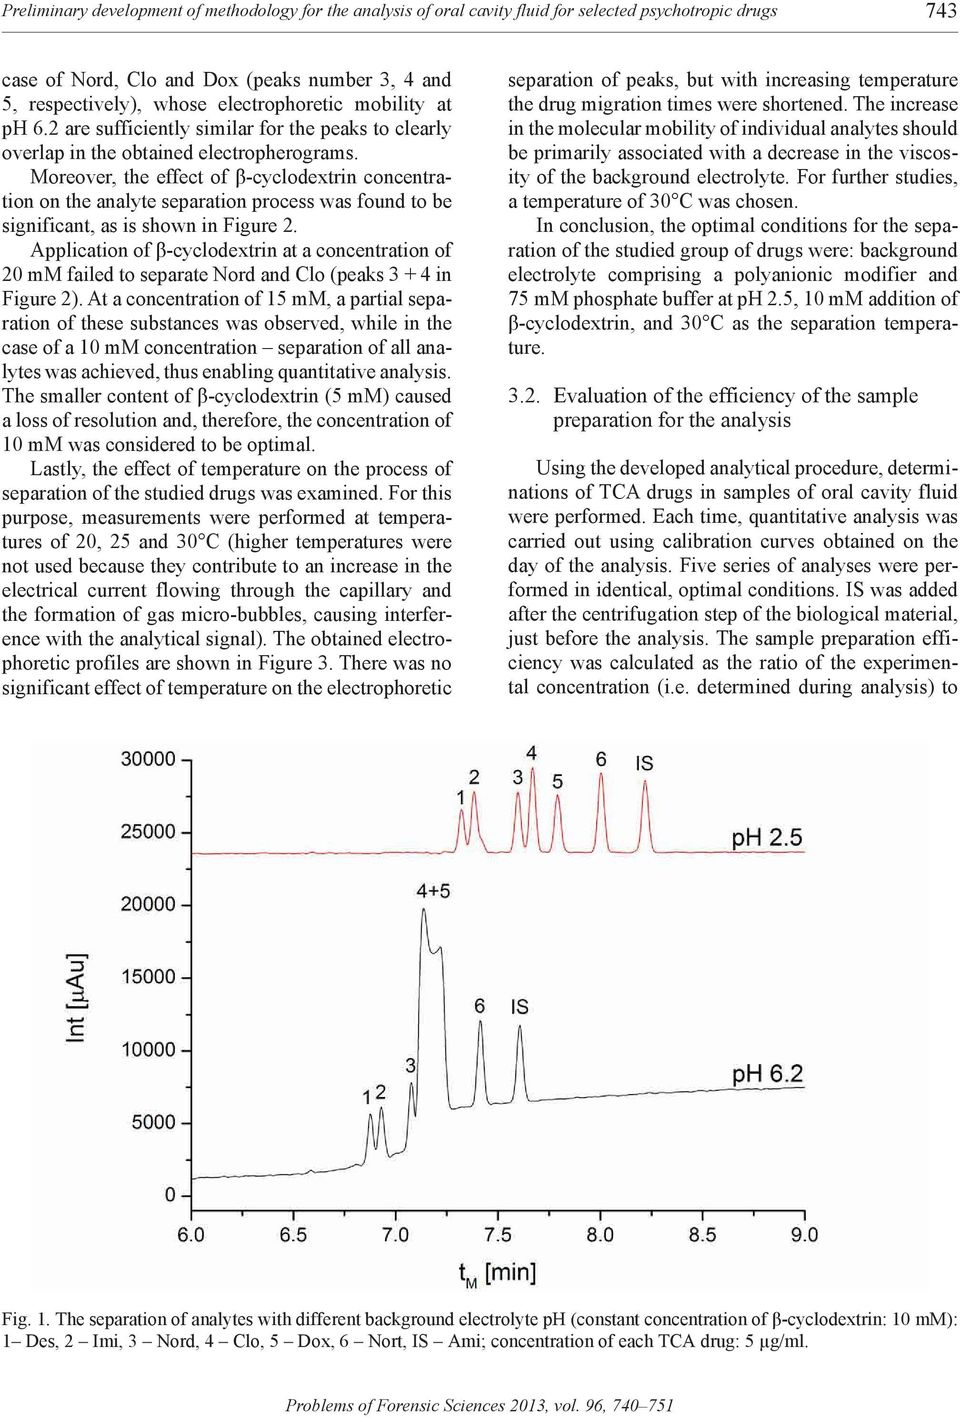 Moreover, the effect of β-cyclodextrin concentration on the analyte separation process was found to be significant, as is shown in Figure 2.